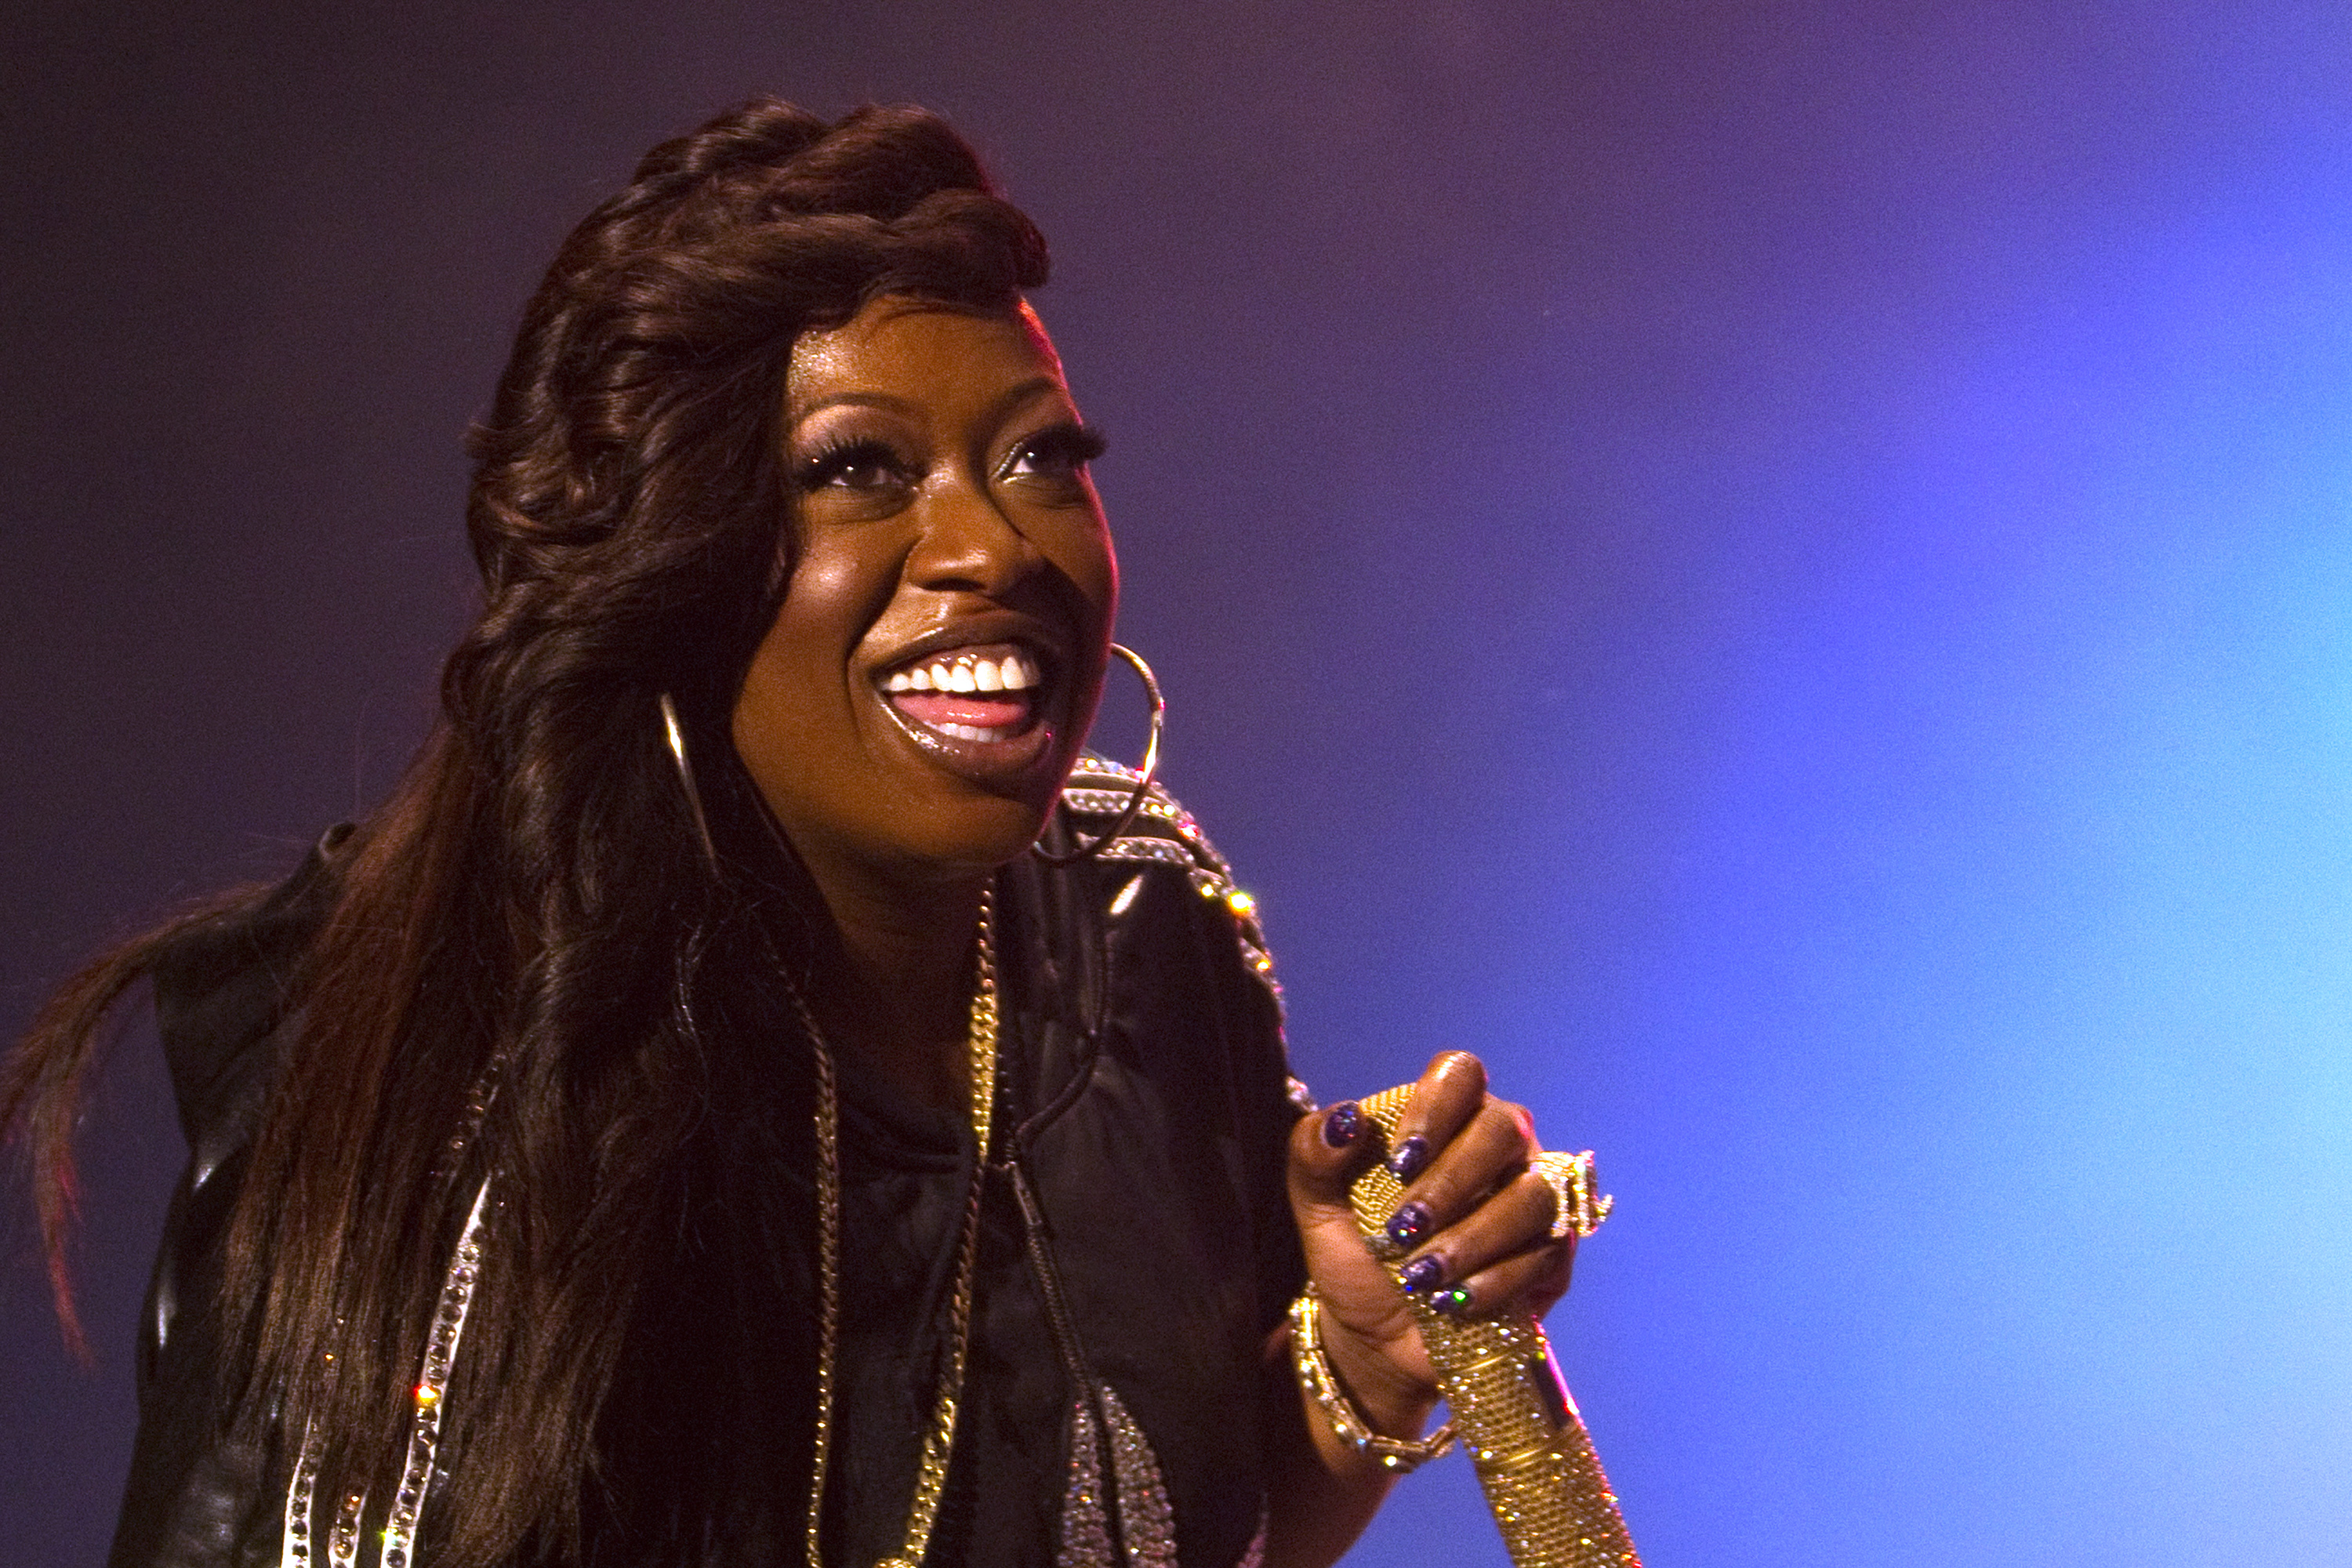 Missy Elliott The first female rapper inducted into Songwriters Hall